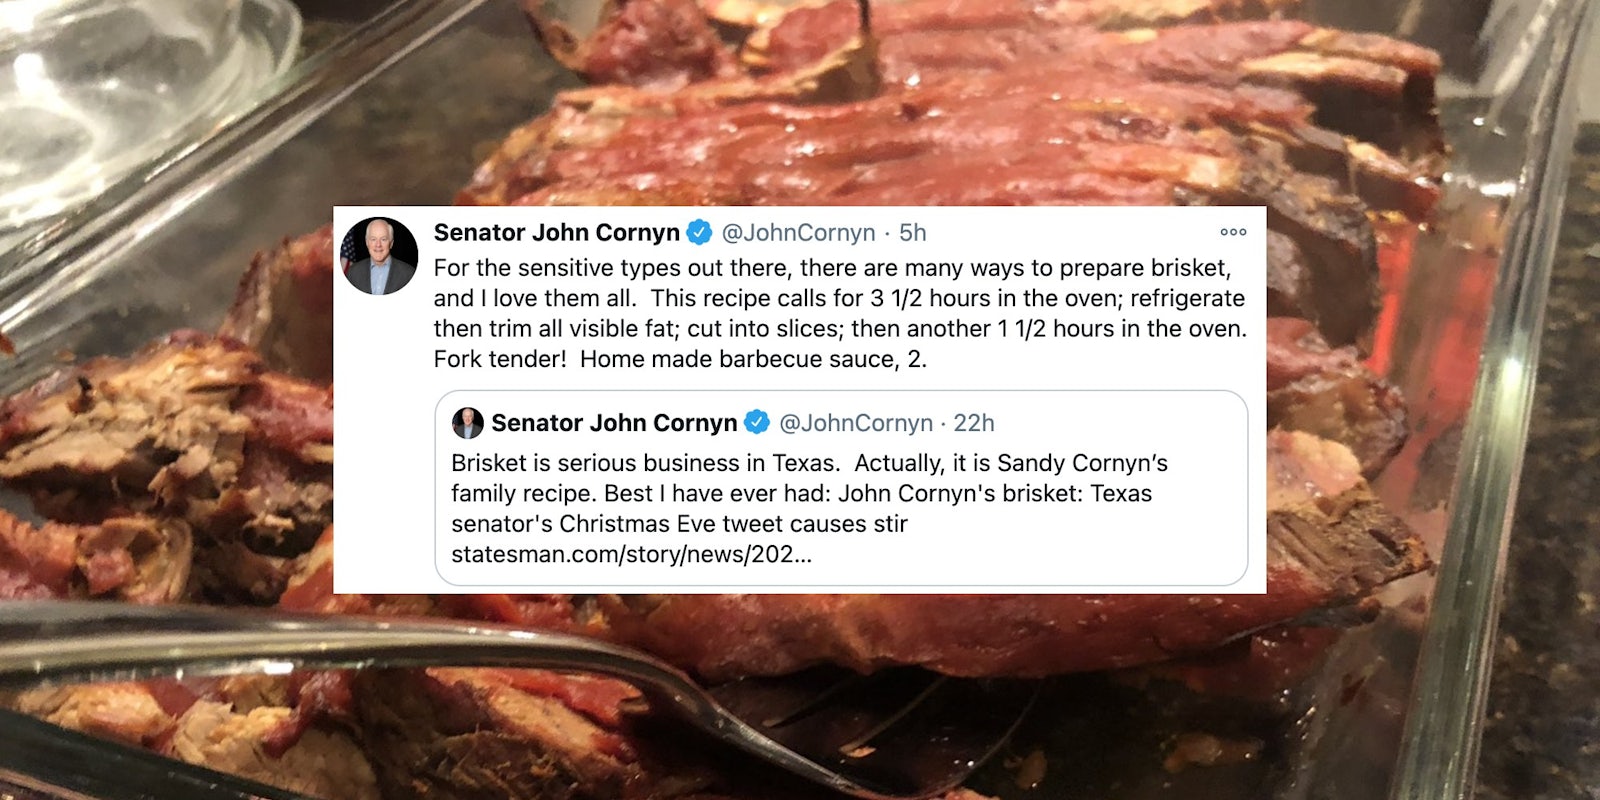 A tweet over a picture of brisket